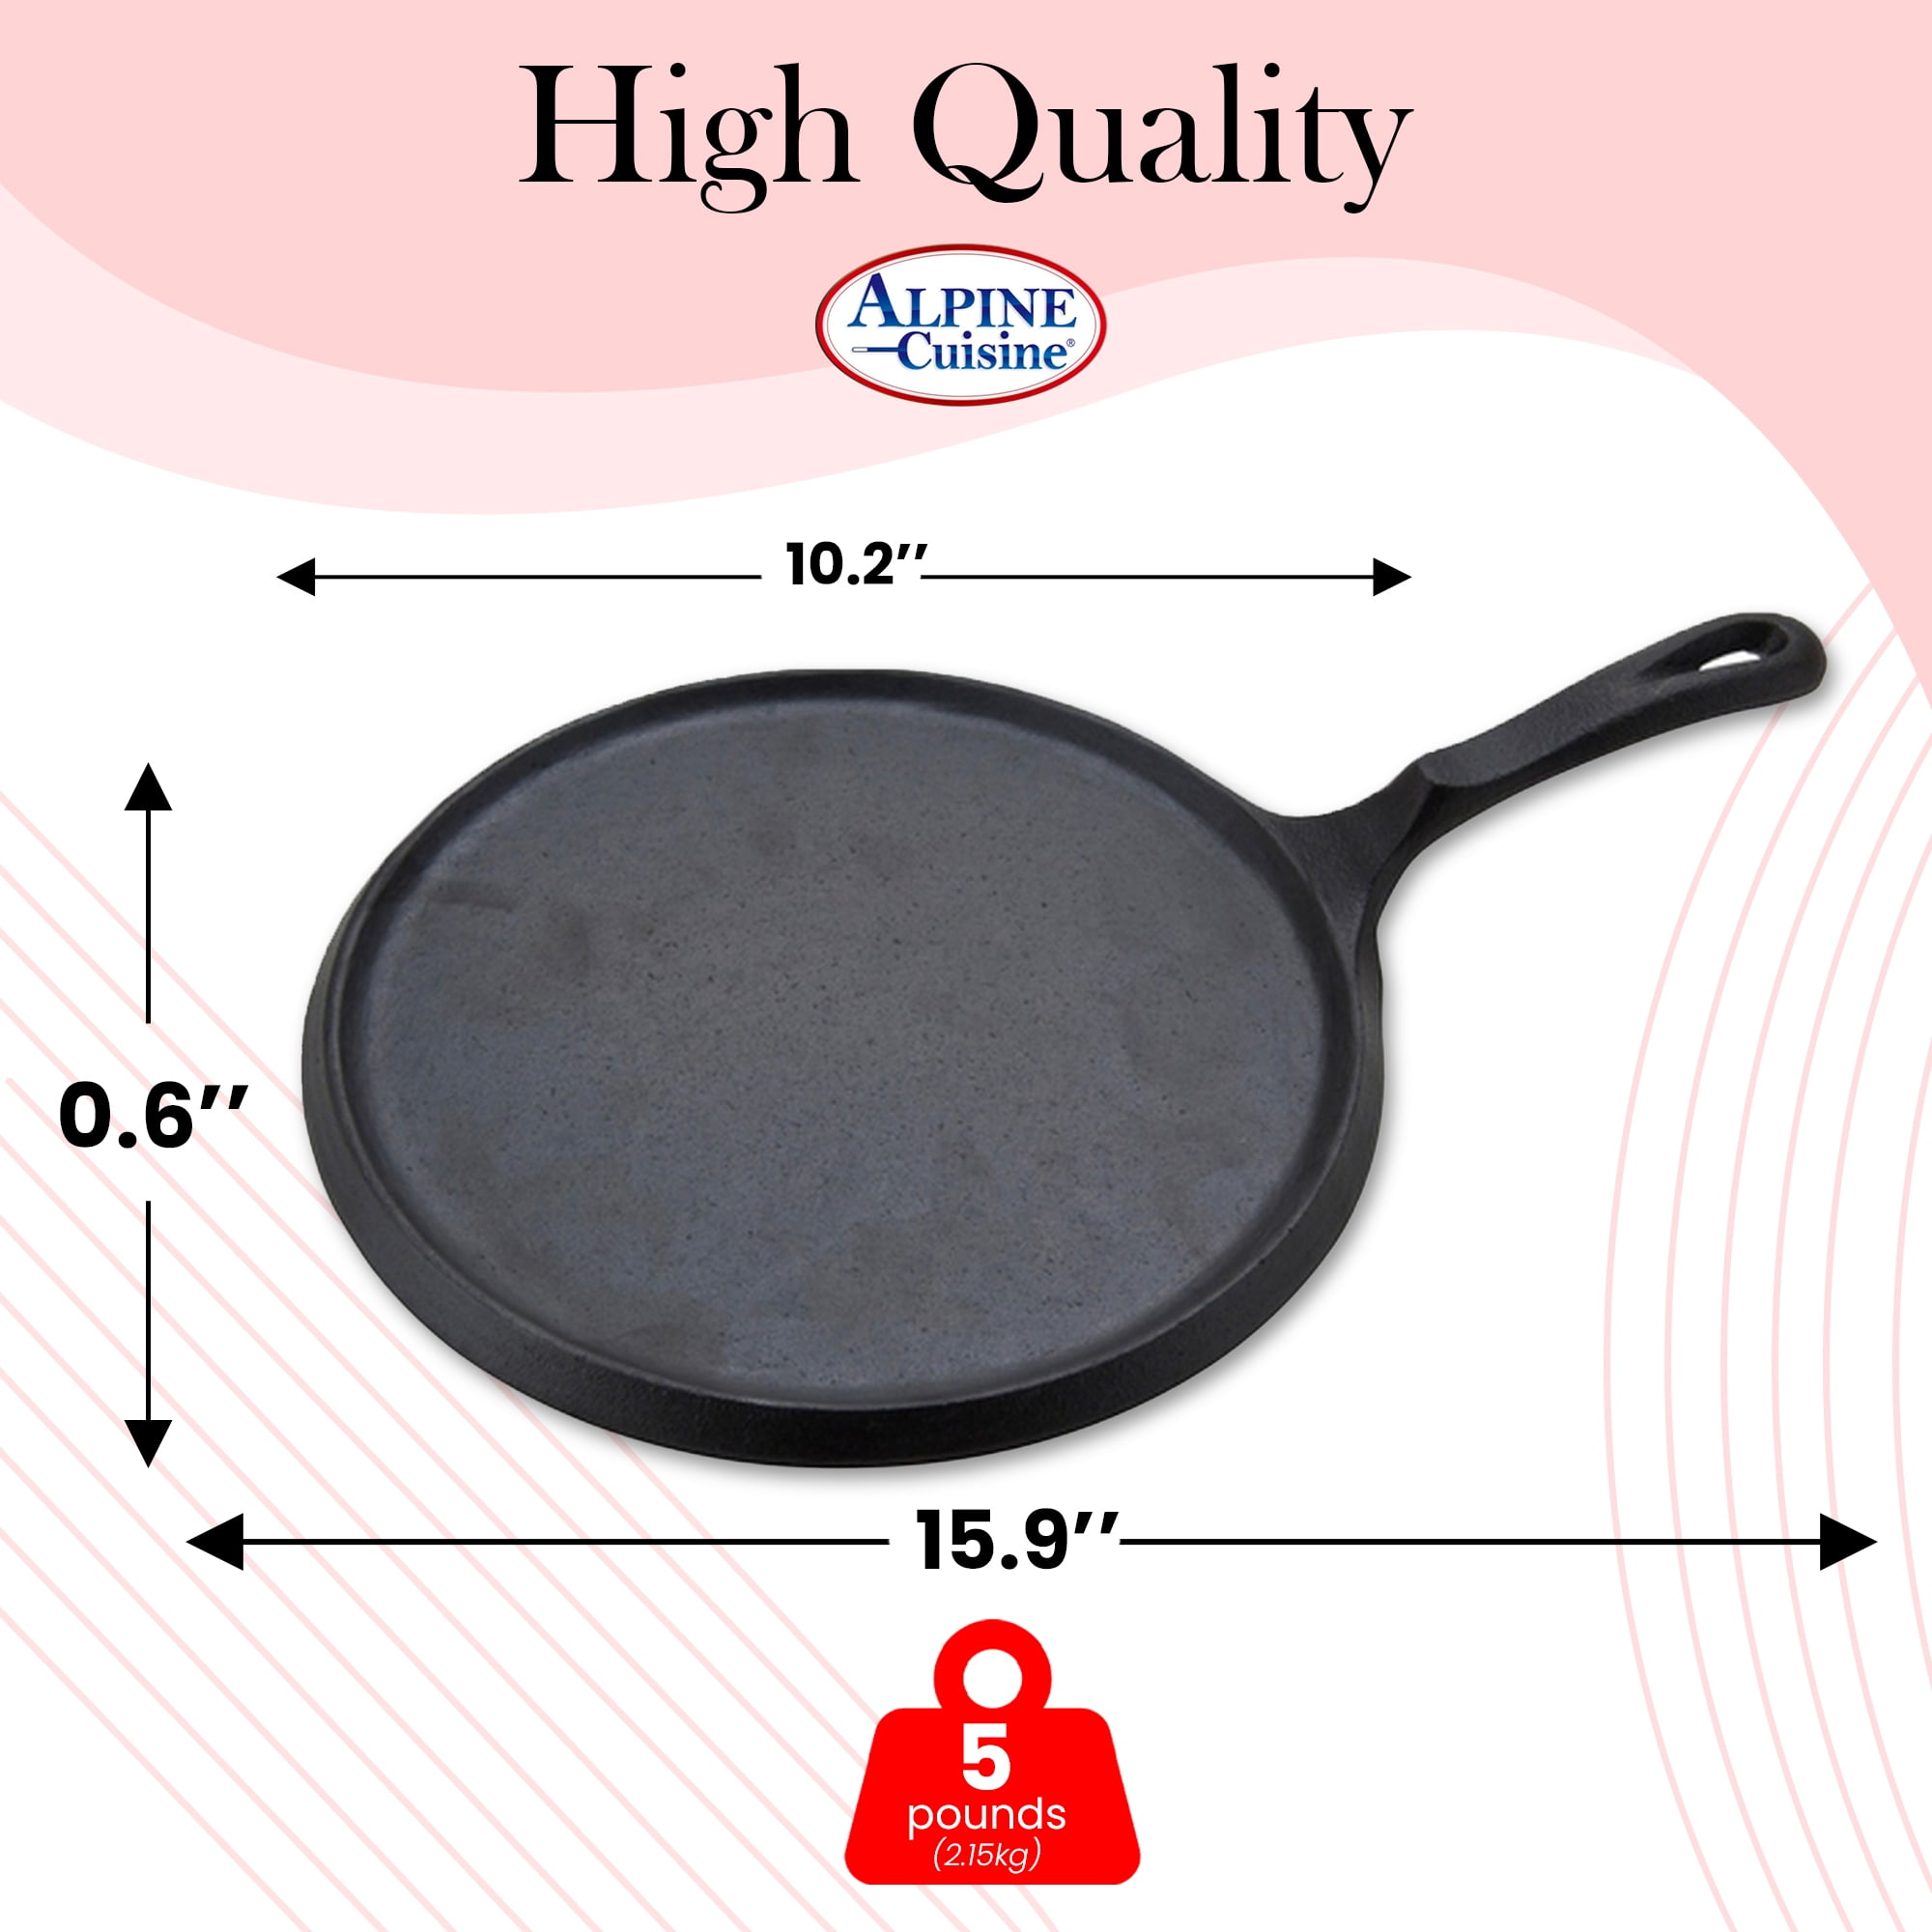  Clay Comal for Tortillas 10 Inches Tortilla Warner Comal para  Tortillas Earthen Comal Unglazed Organic Handmade griddle for tortillas  made in Colombia : Handmade Products